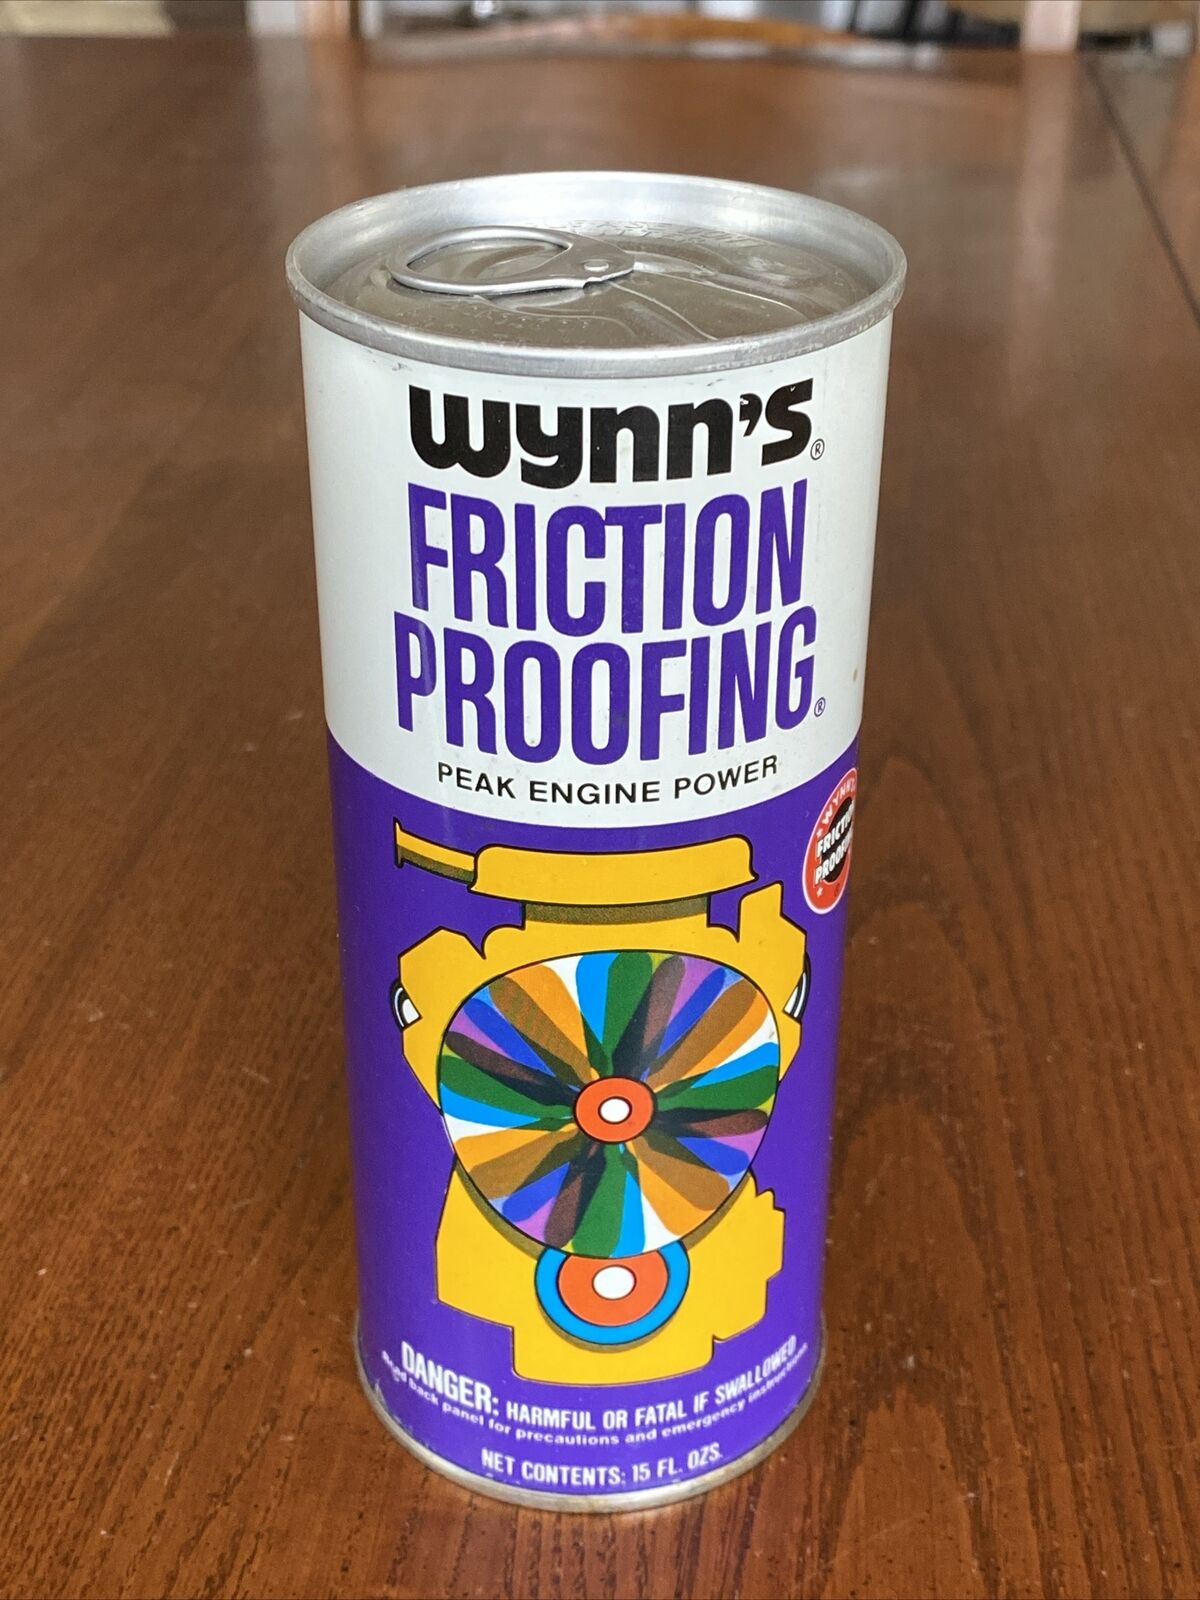 Vtg 1969 Wynn\'s Friction Proofing Peak Engine Power FP 1/75 15 Ozs Can UNOPENED